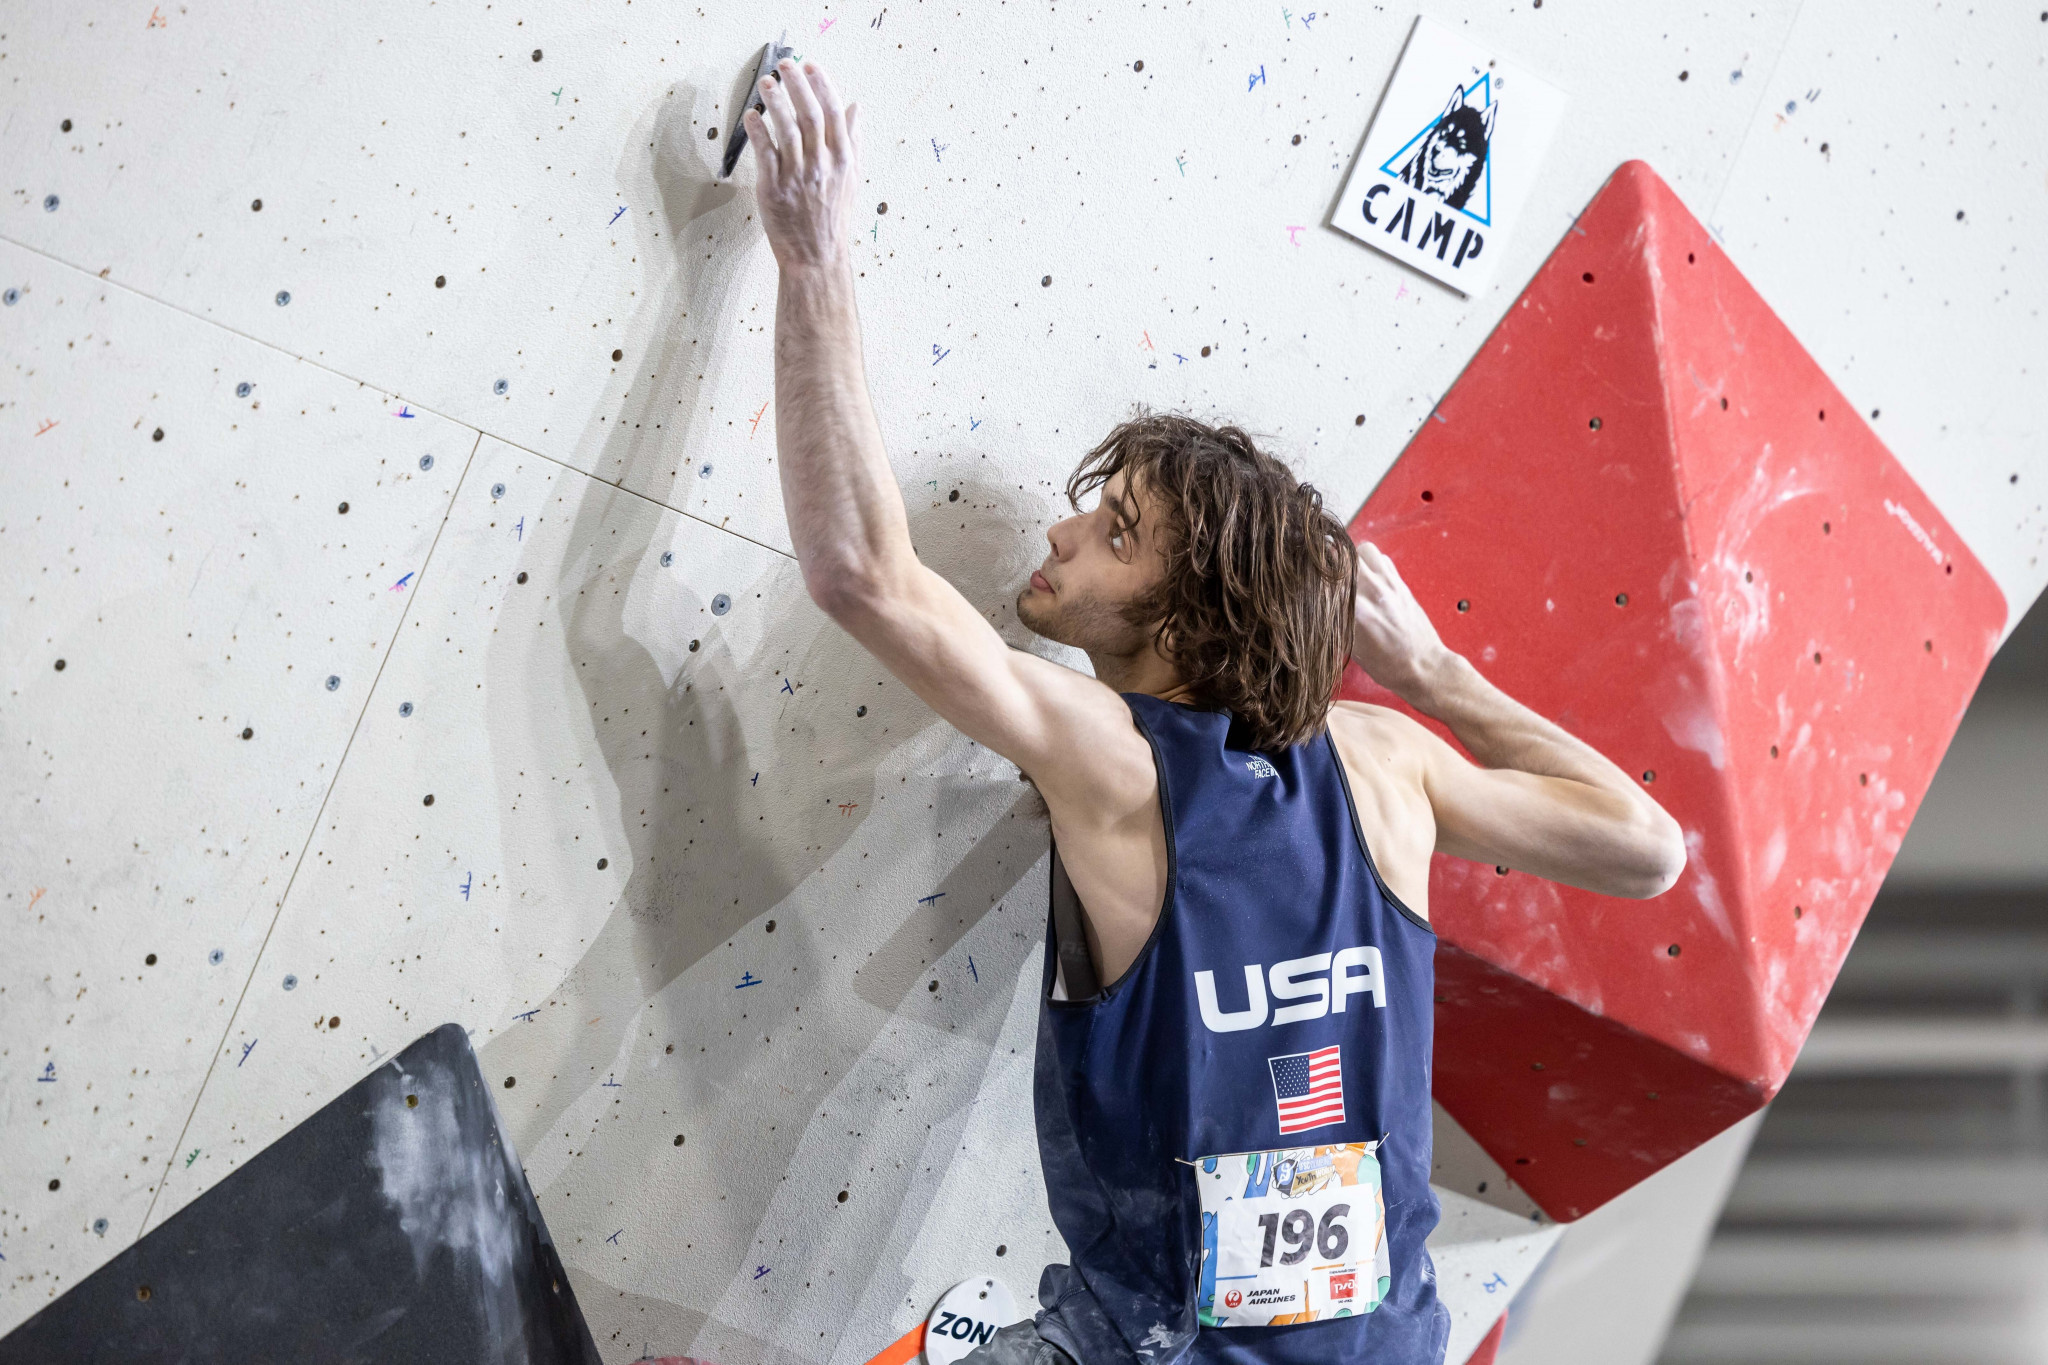 Dallas to become first US city to host IFSC Youth World Championships in 2022